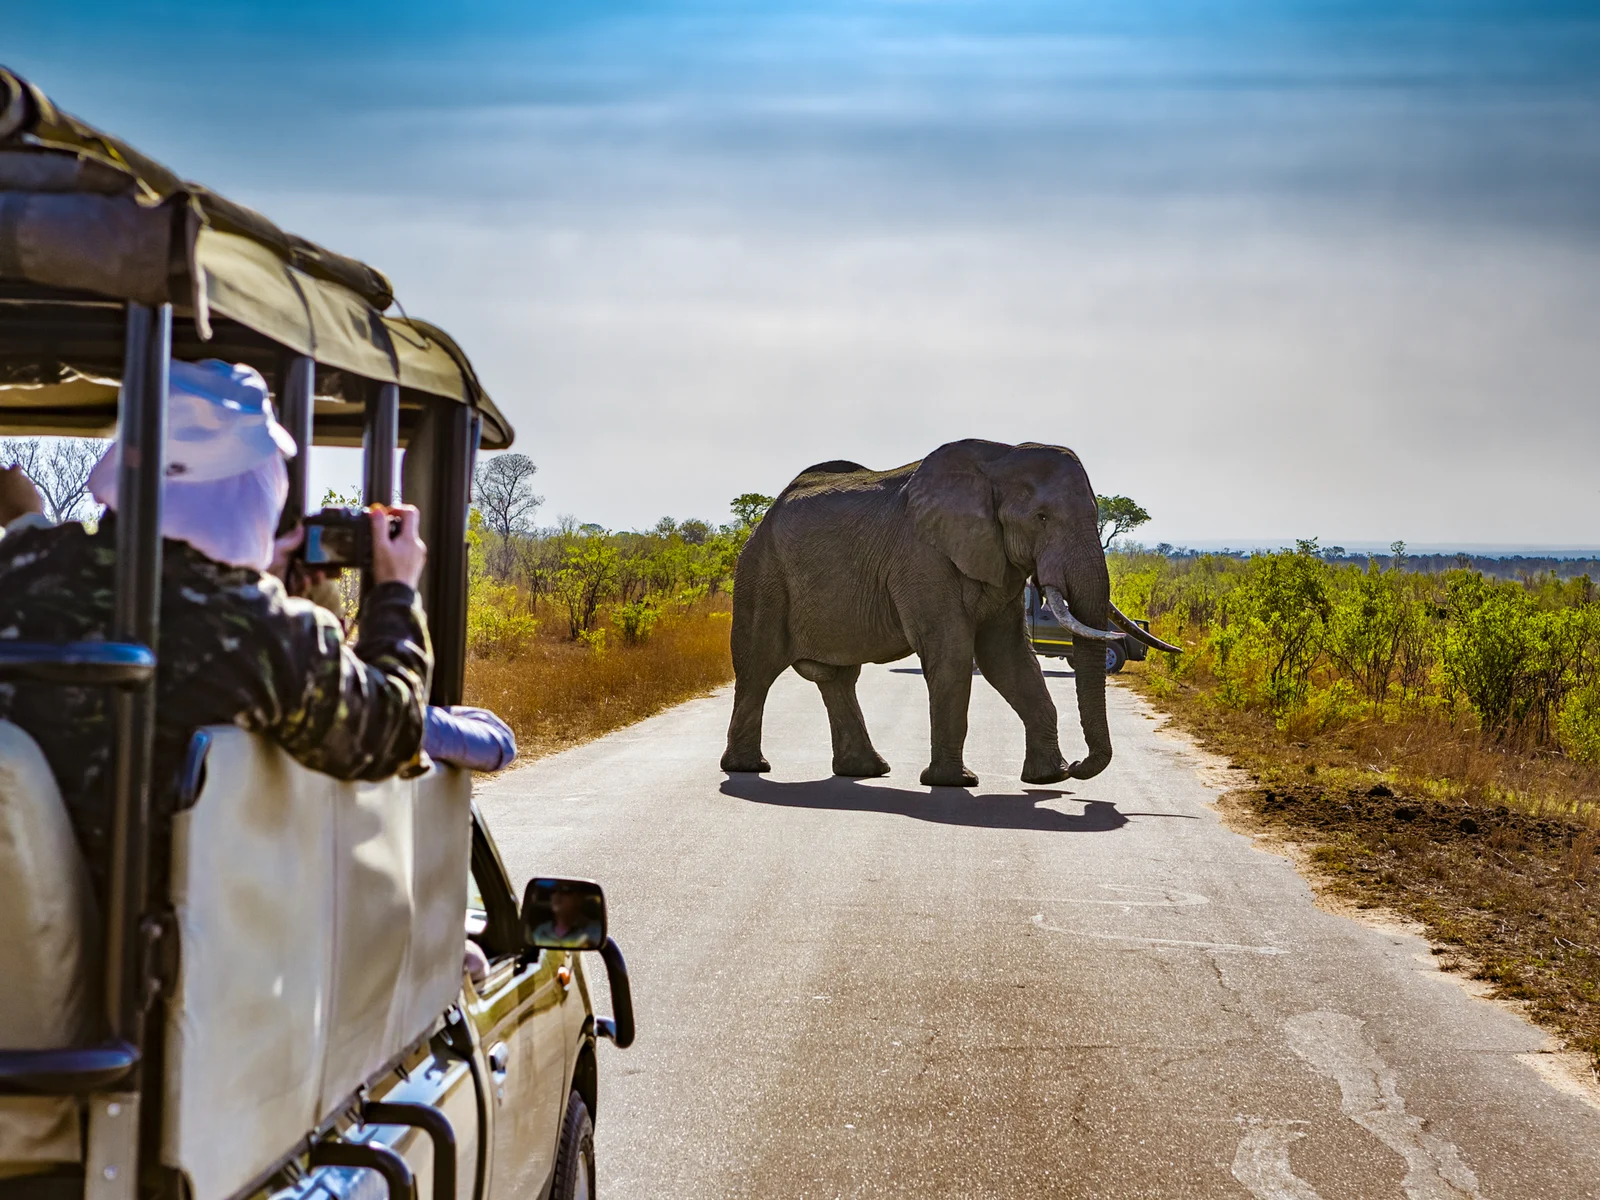 Elephant crossing a road as seen during the best time to visit South Africa on a safari